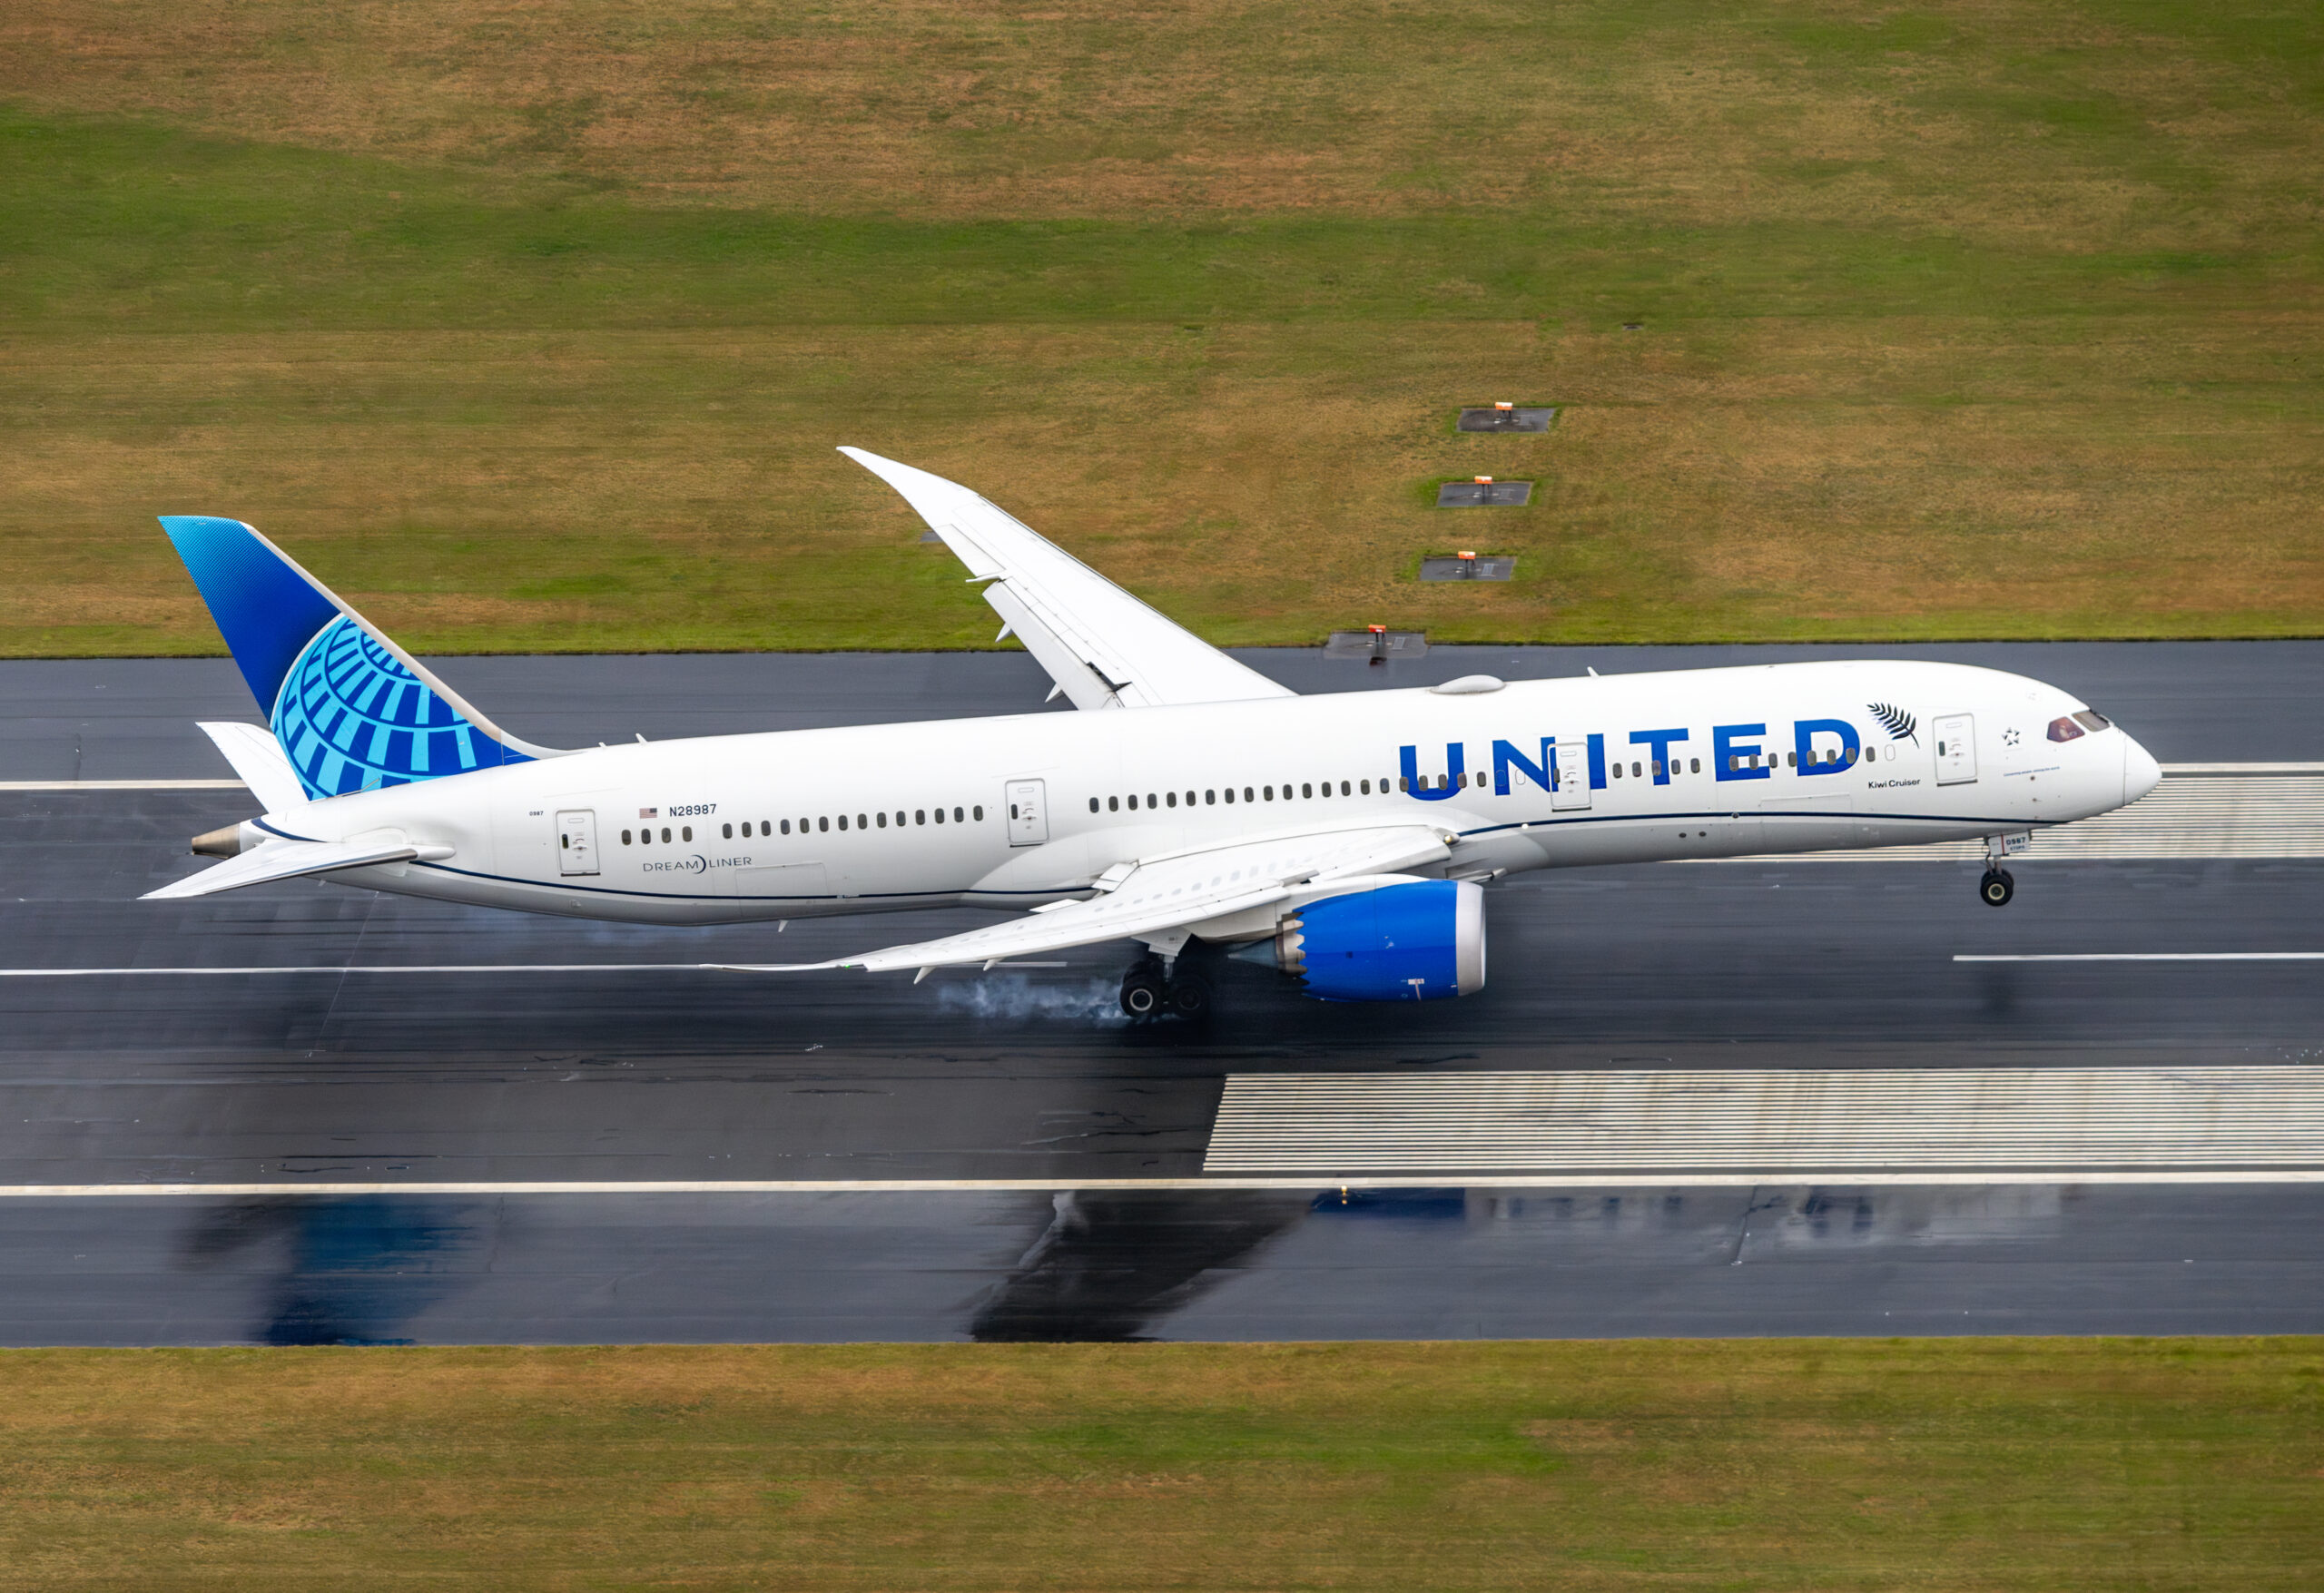 United Boeing 787-9 lands for the first time in Christchurch